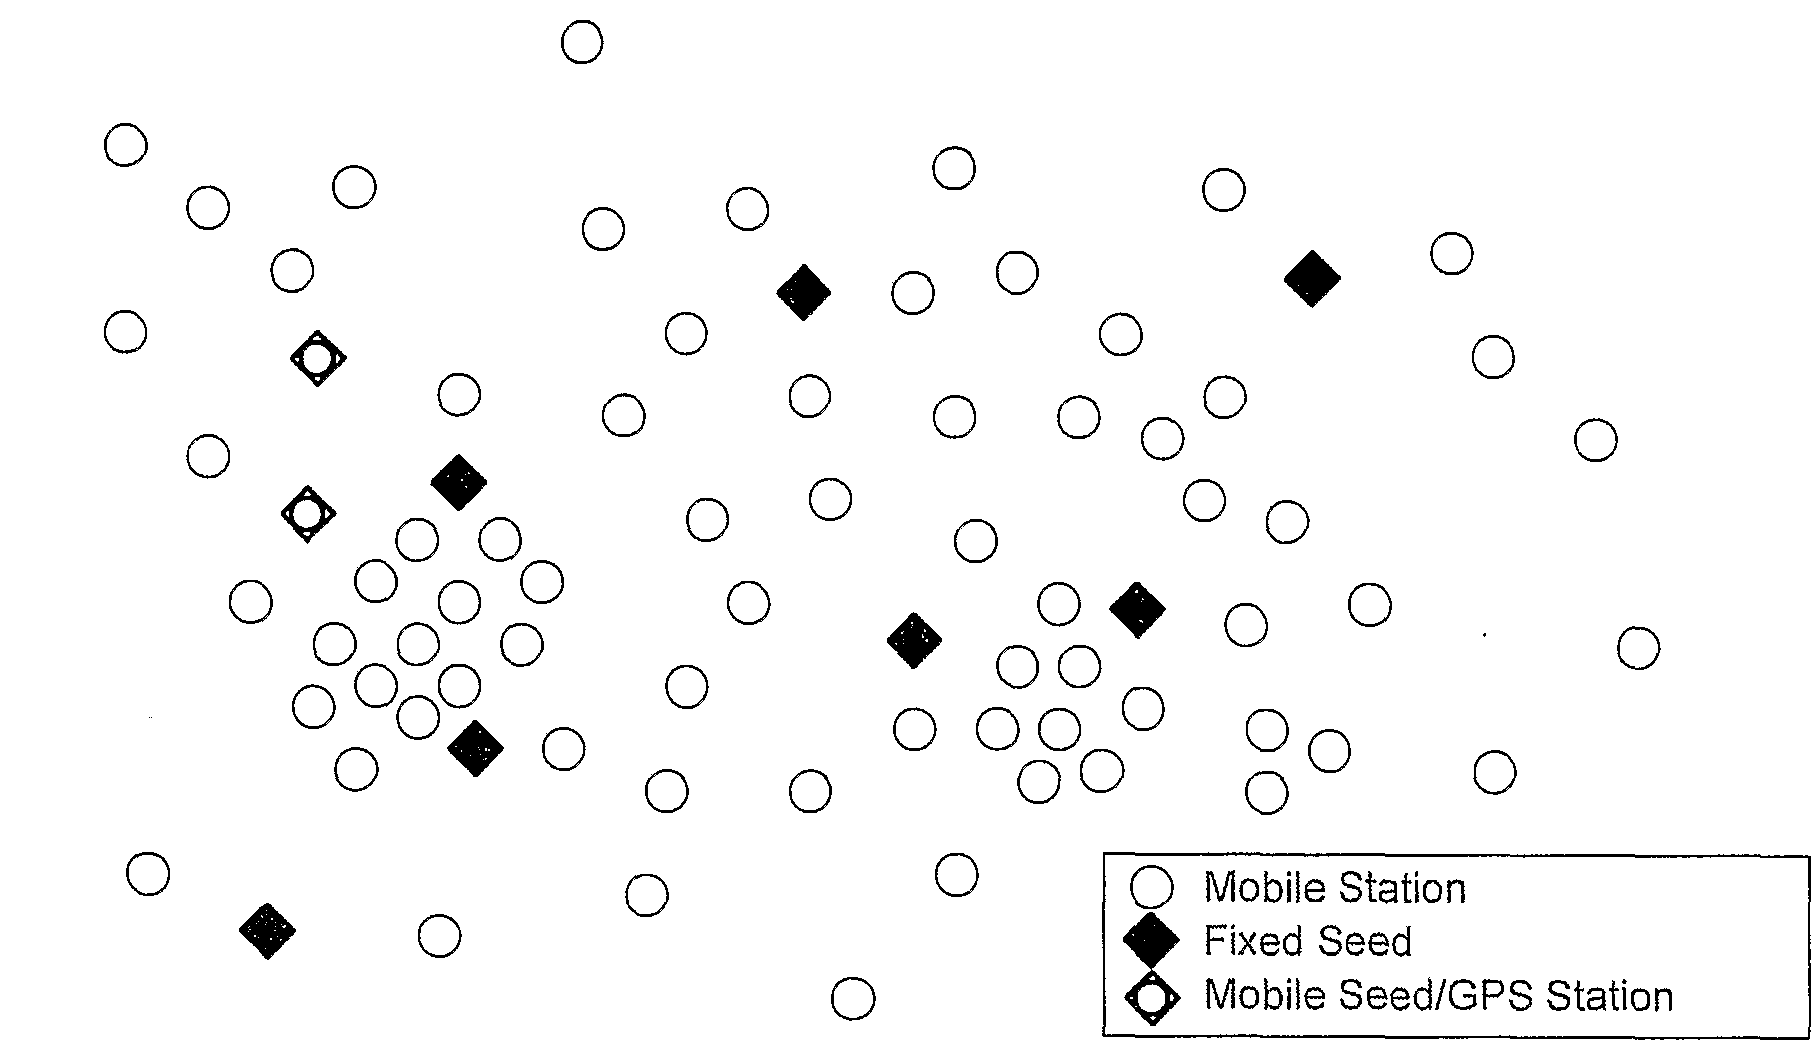 Position Determination of Mobile Stations in a Wireless Network